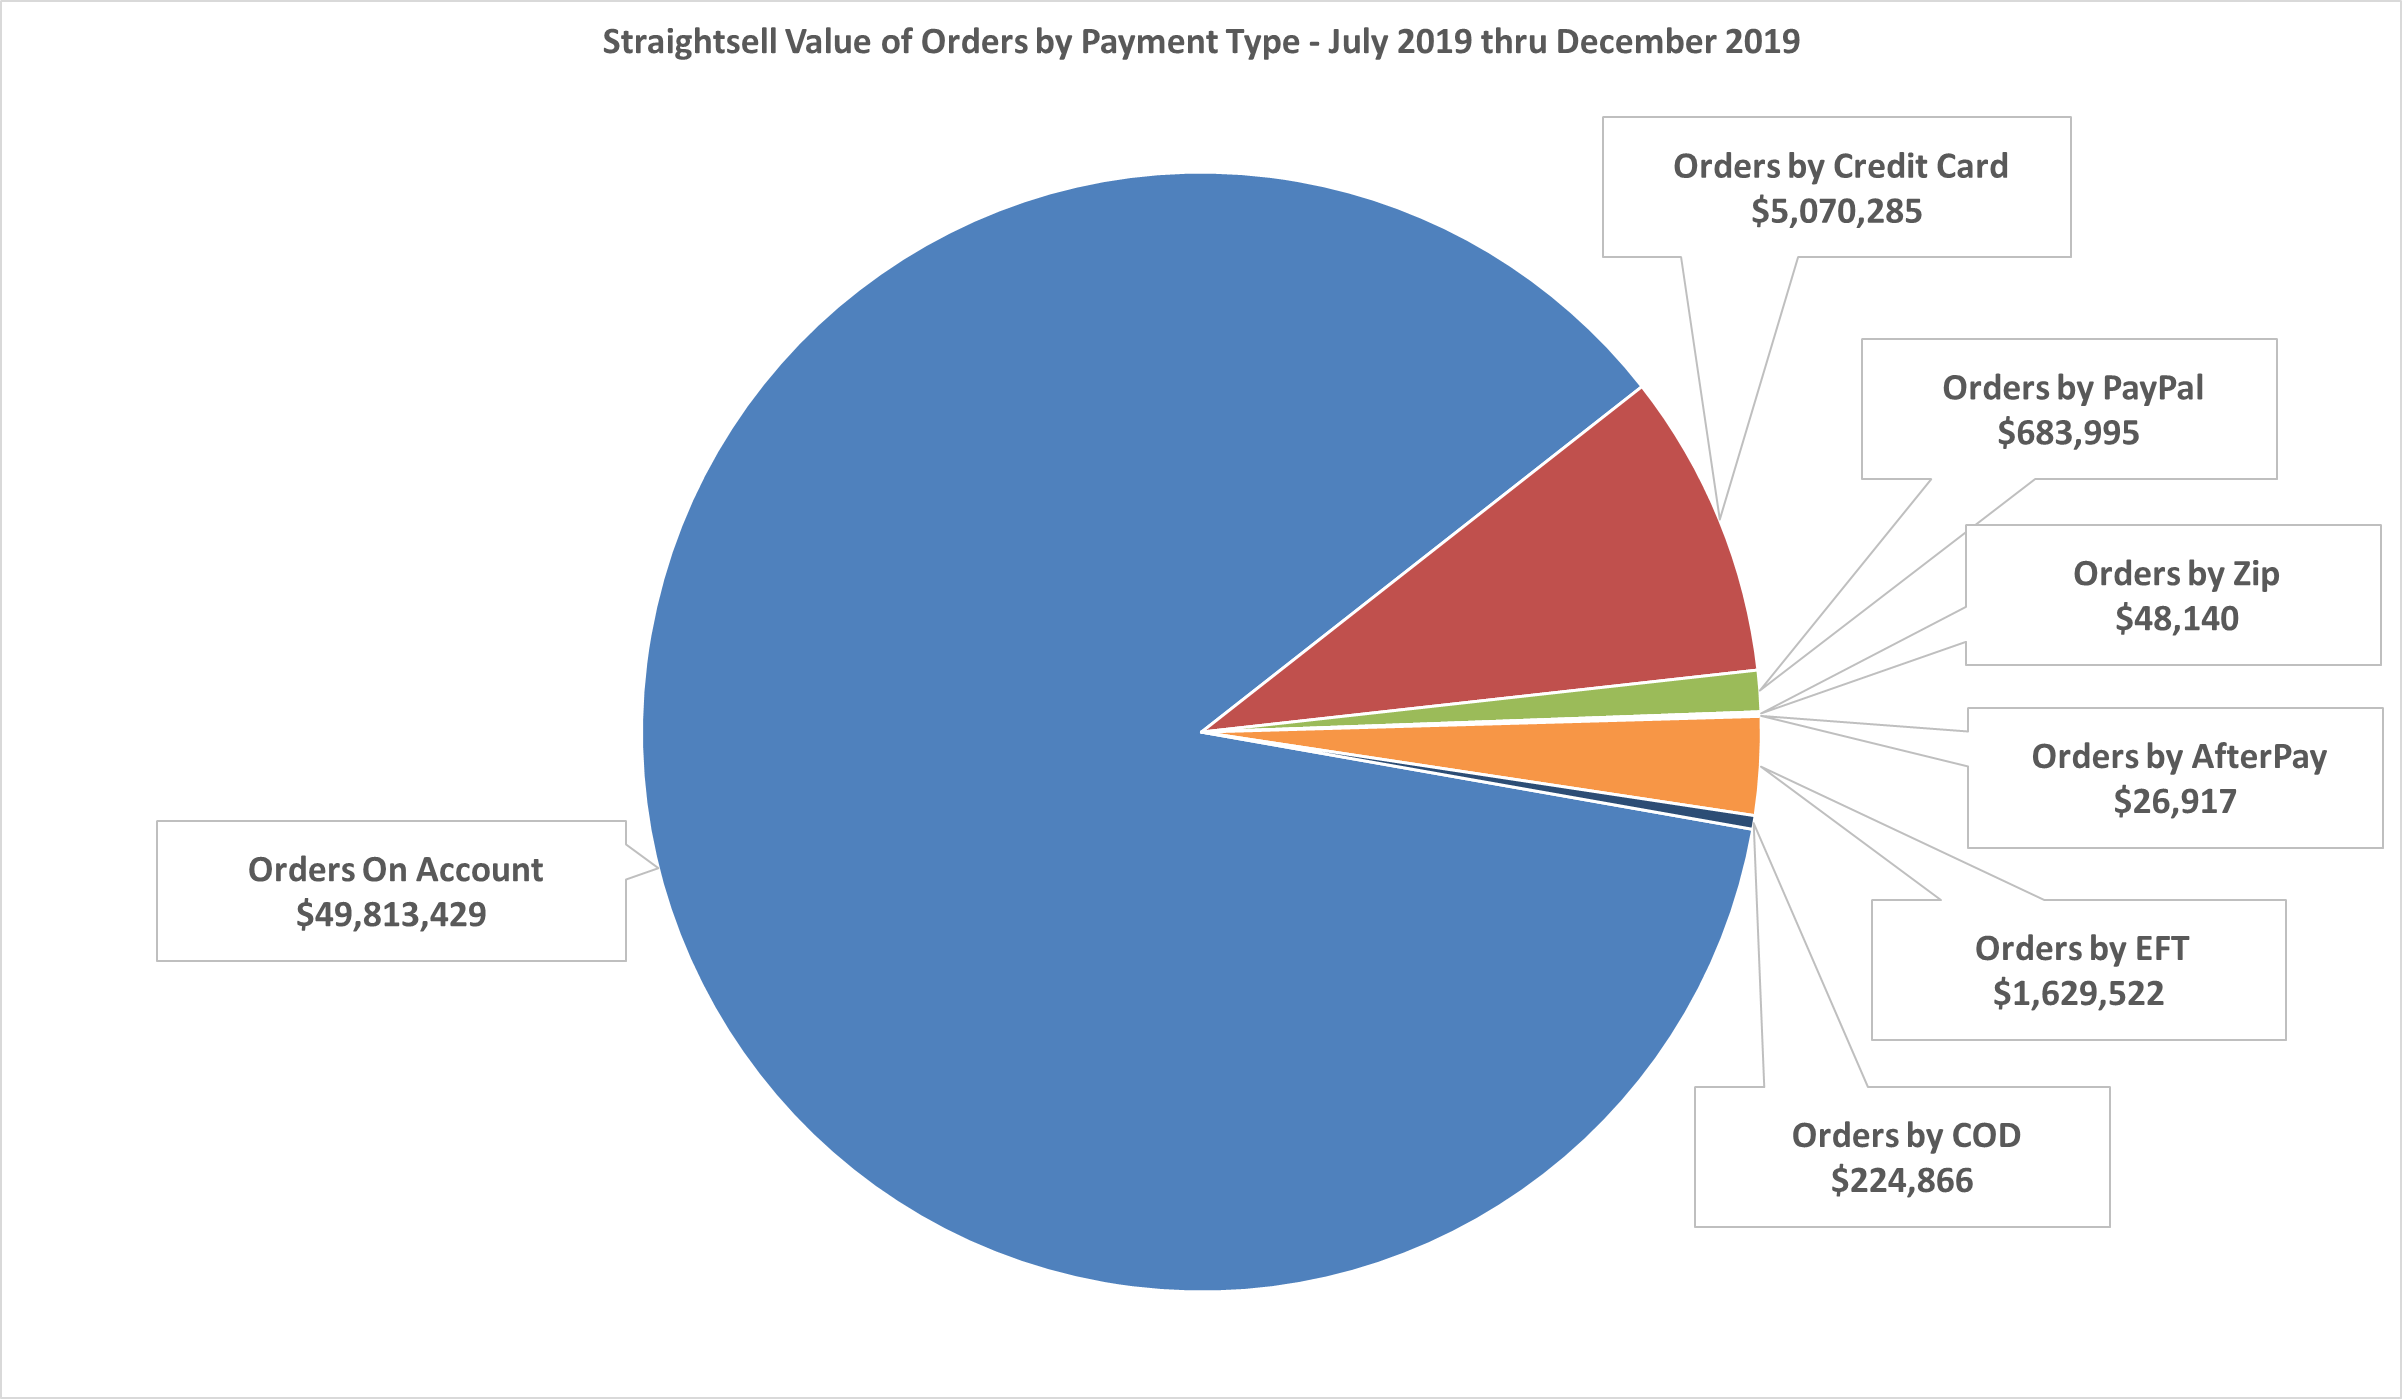 Straightsell Value of Orders by Payment Type - July 2019 thru December 2019